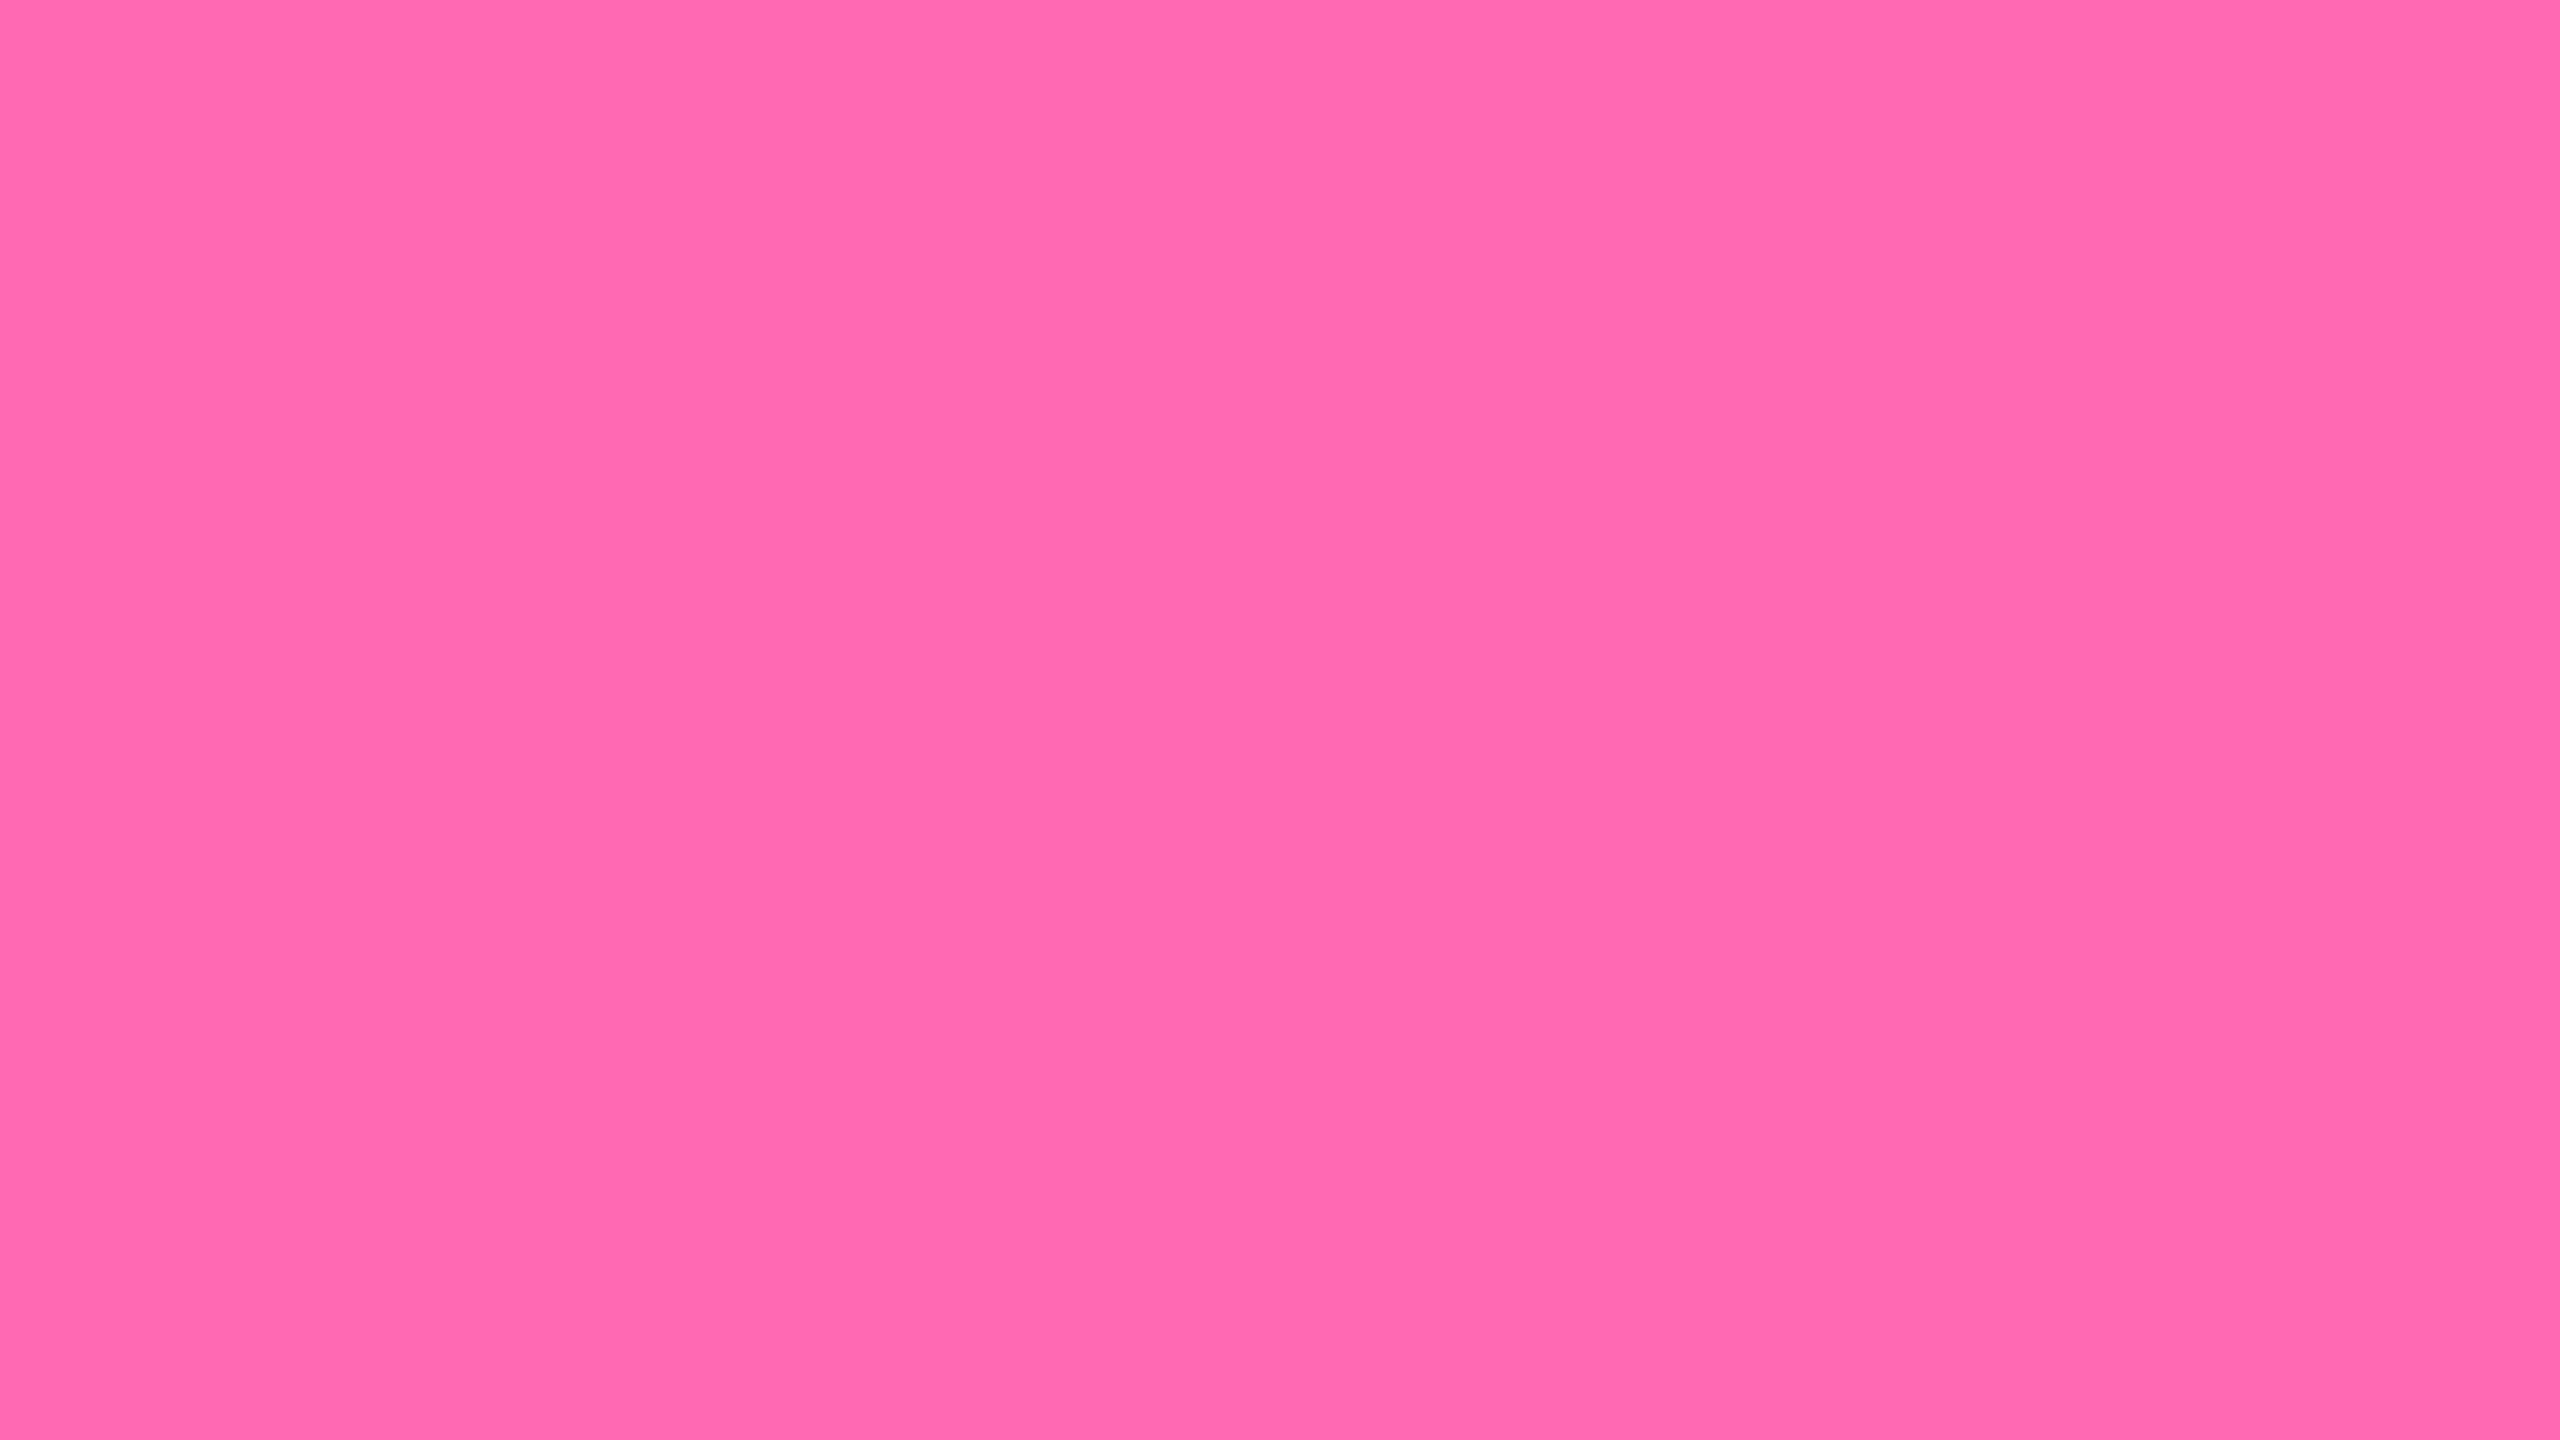 Hot Pink Solid Color Background Image Amp Pictures Becuo